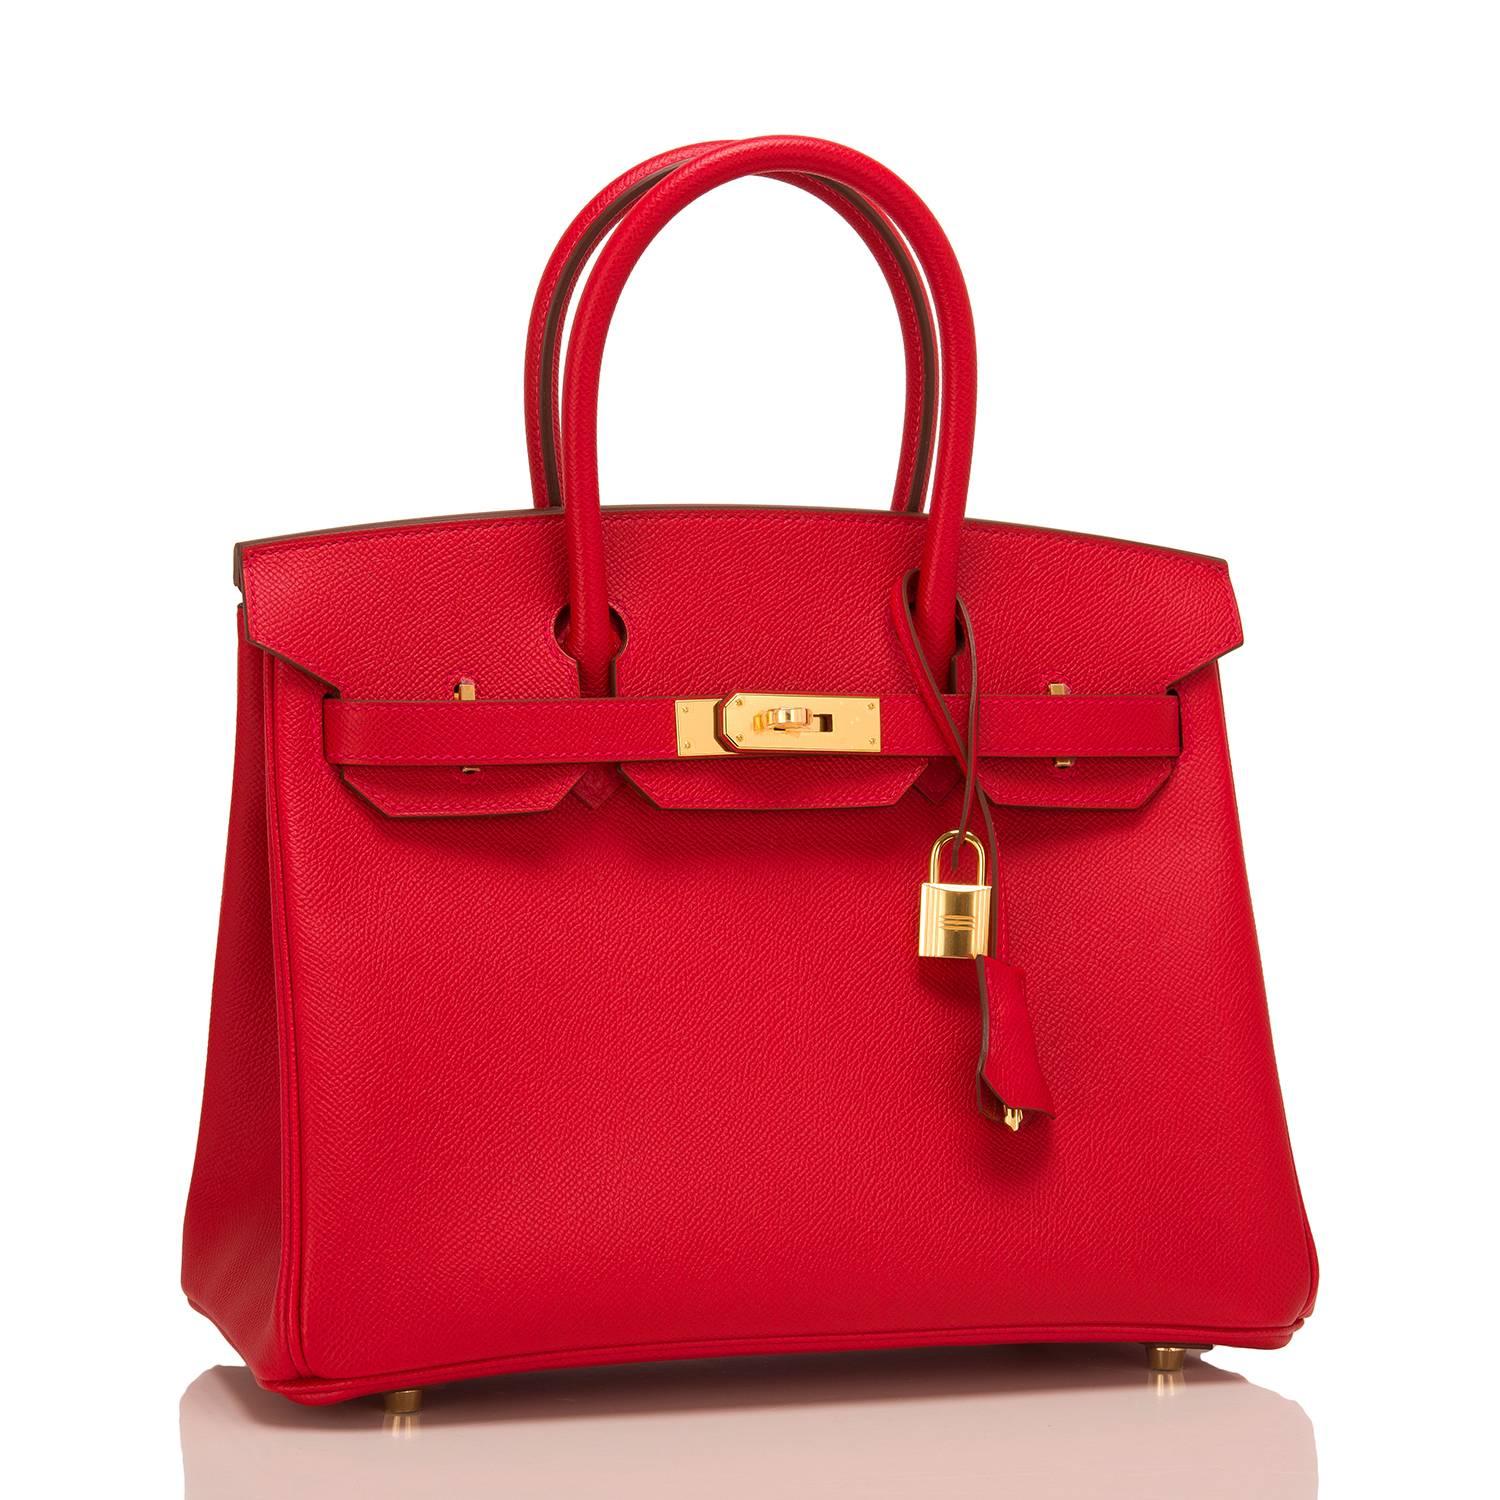 Hermes Rouge Casaque Birkin 30cm of epsom leather with gold hardware.

This Birkin has tonal stitching, a front toggle closure, a clochette with lock and two keys, and double rolled handles.

The interior is lined with Rouge Casaque chevre and